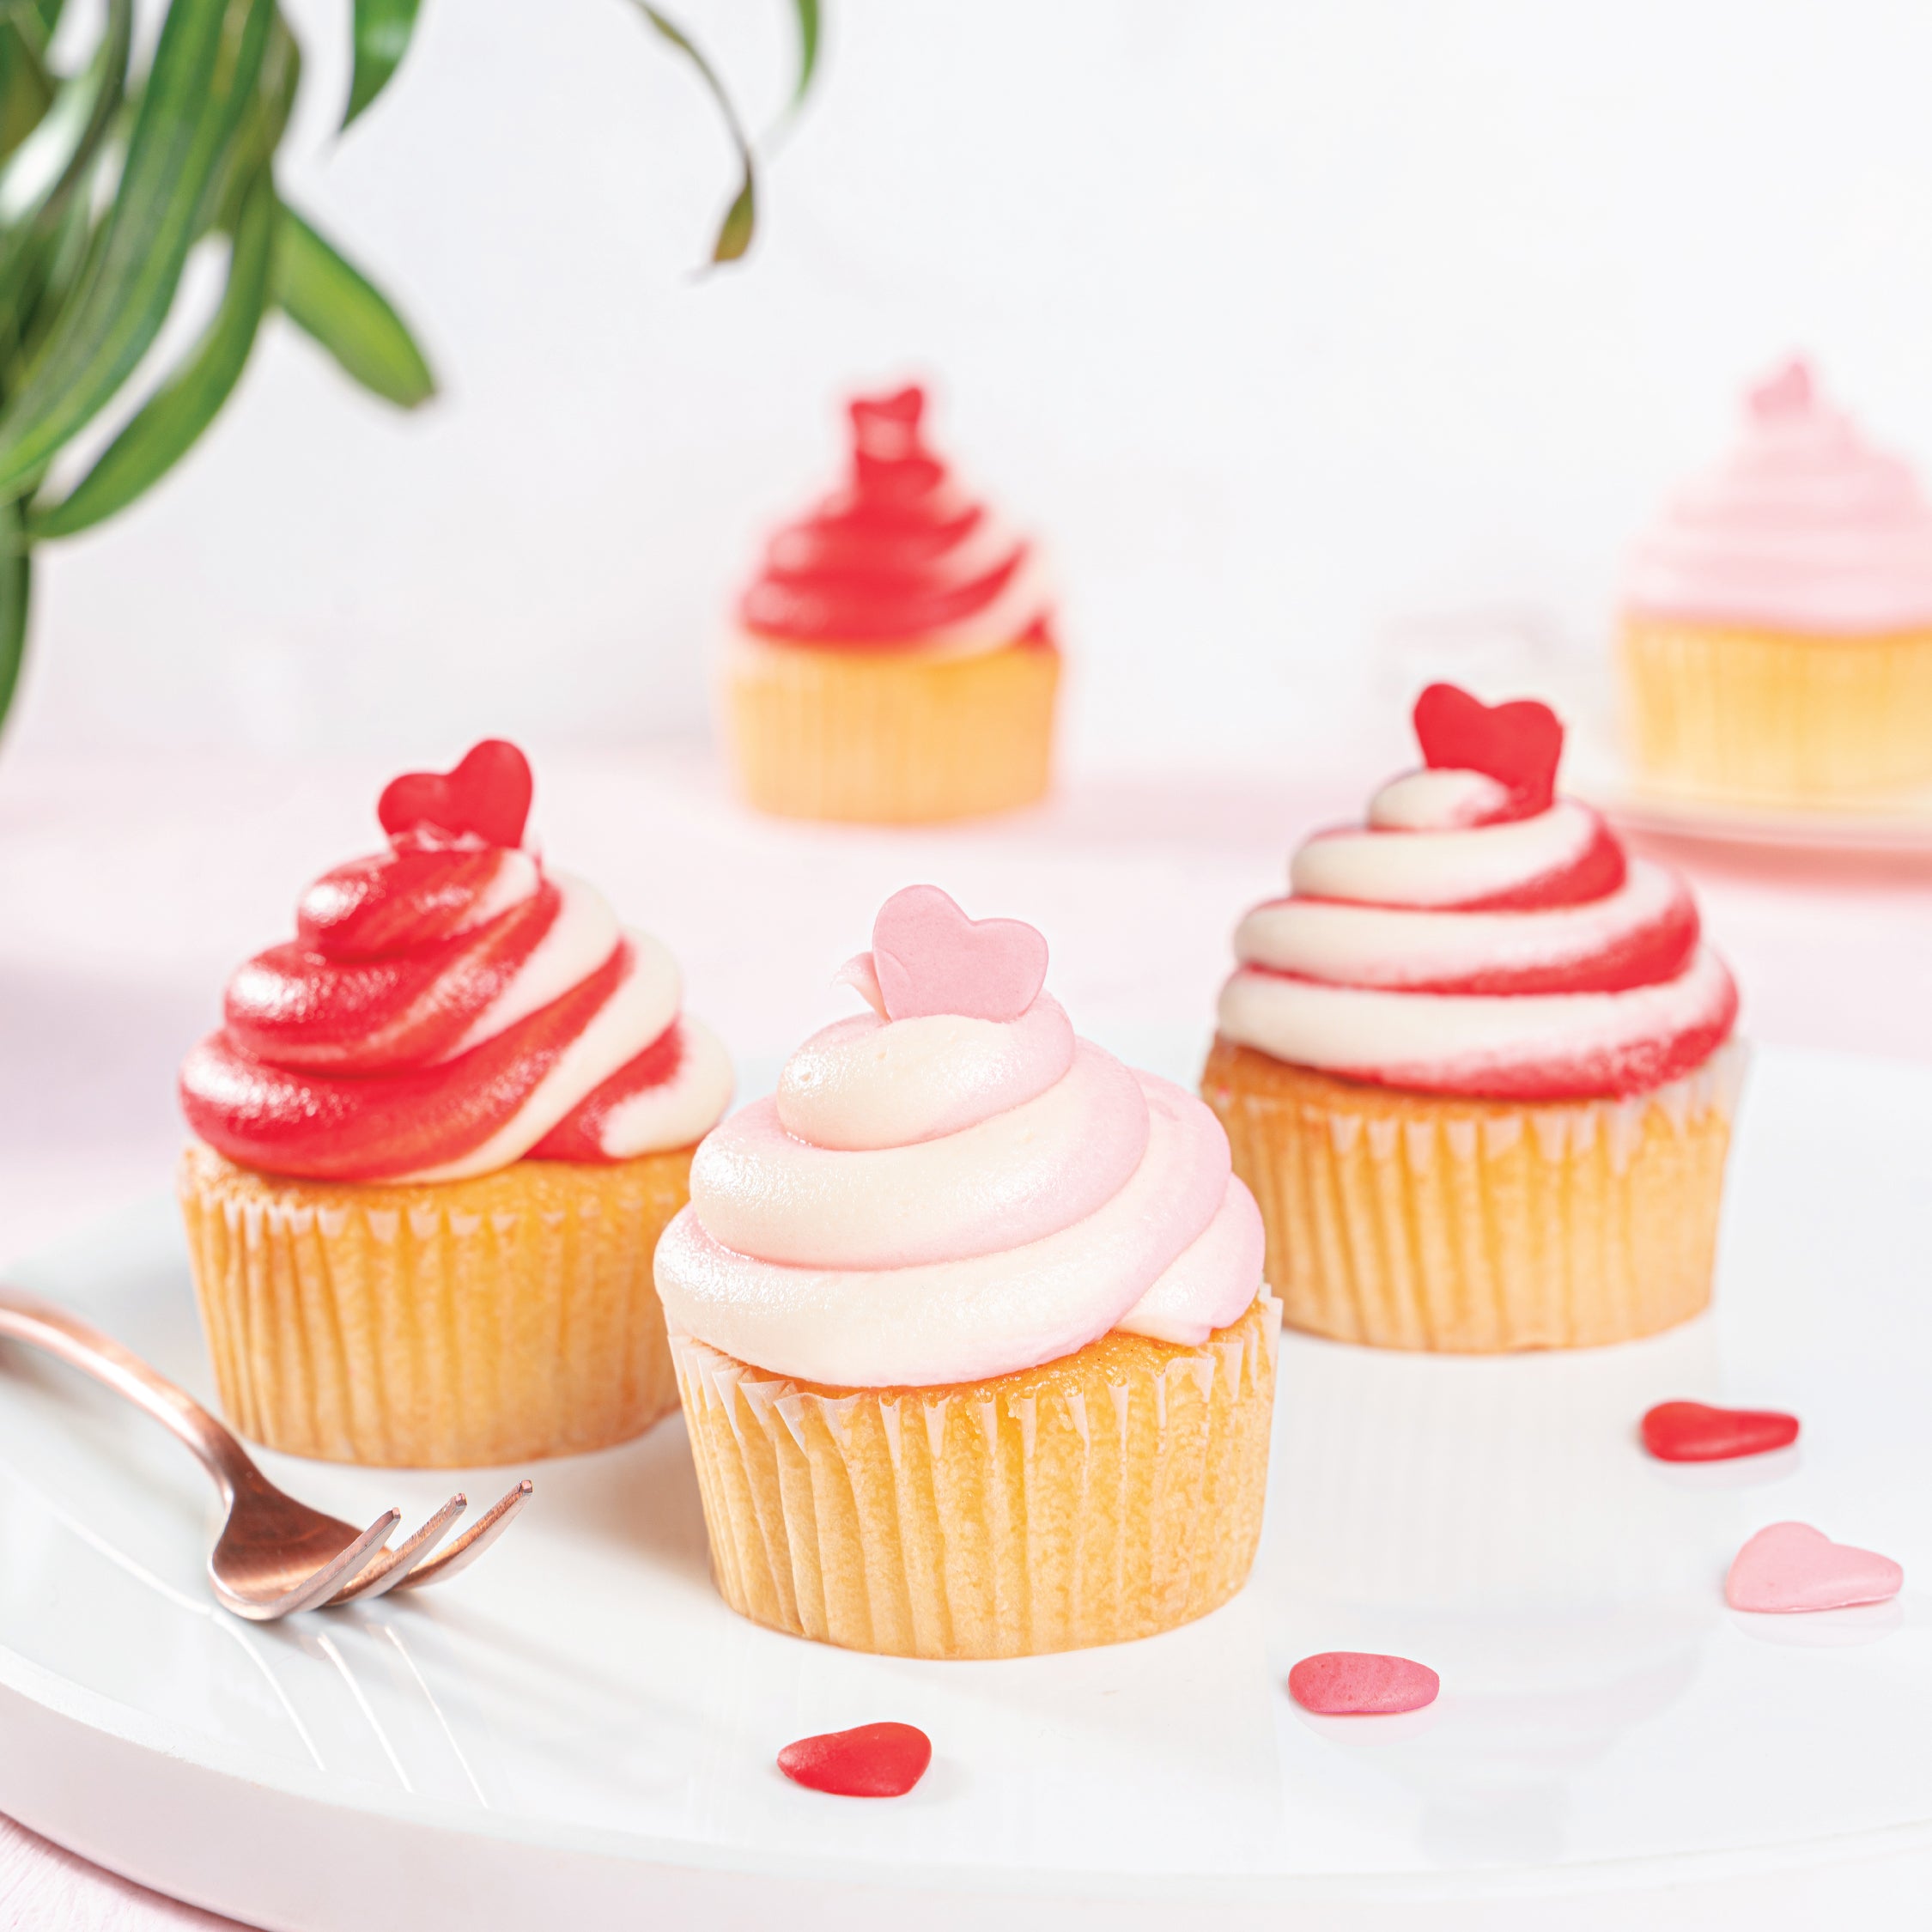 Vday Cupcakes (Box of 4) - KHI ONLY